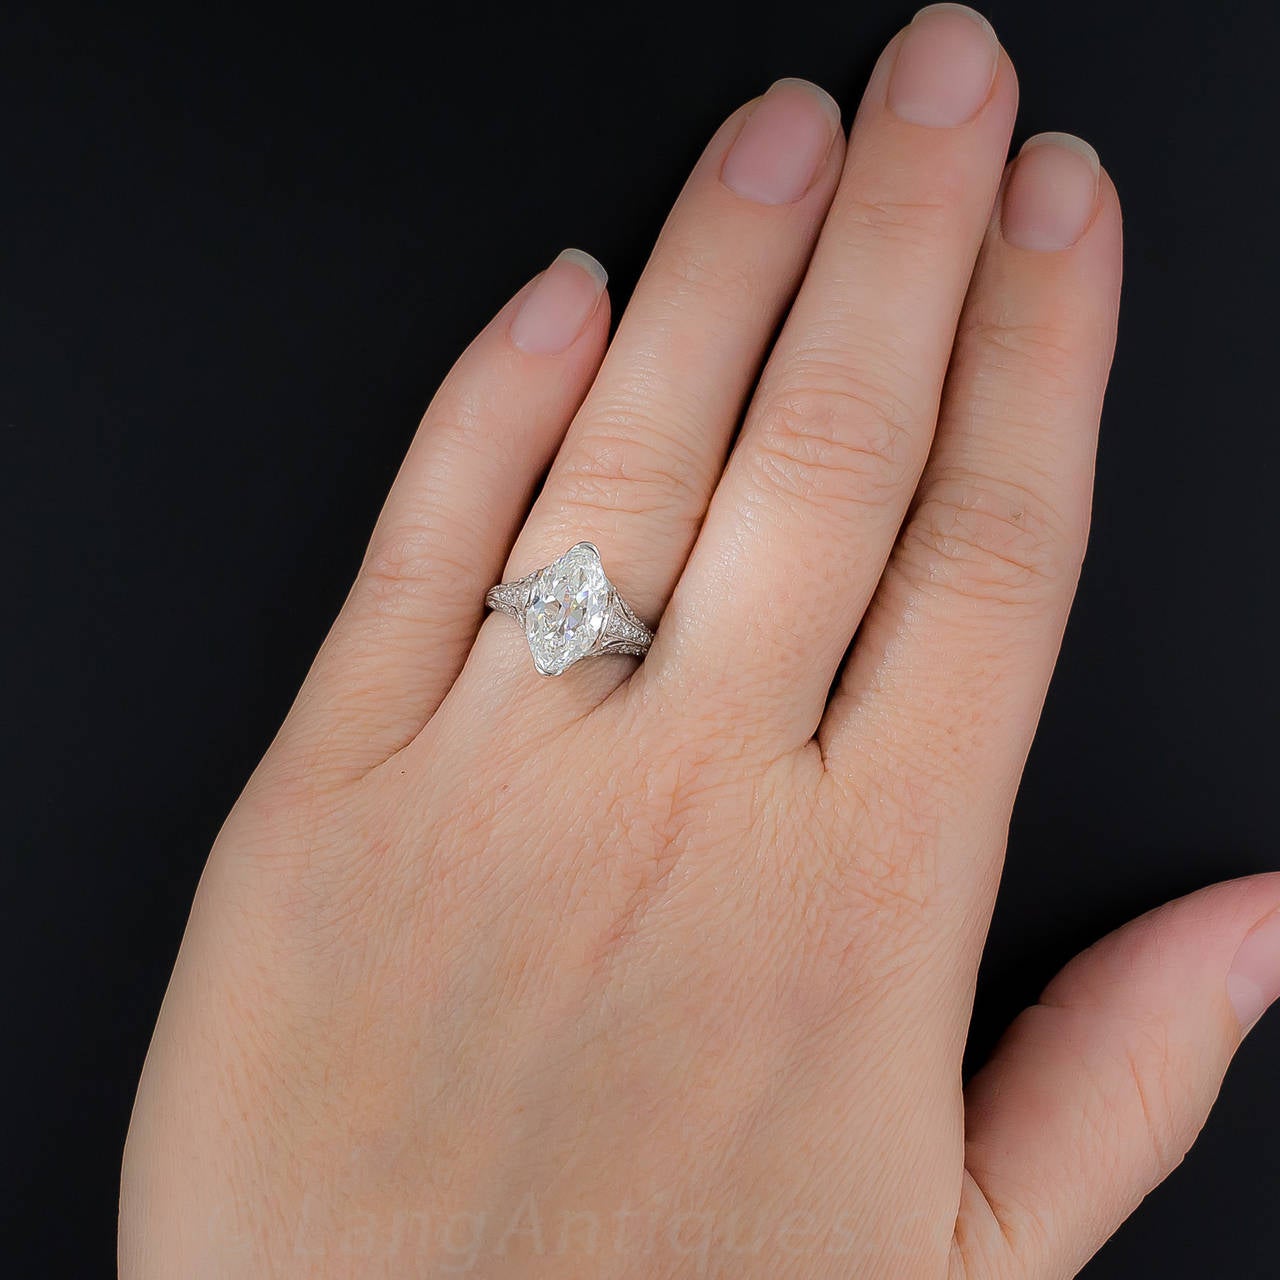 1 ct marquise diamond engagement rings